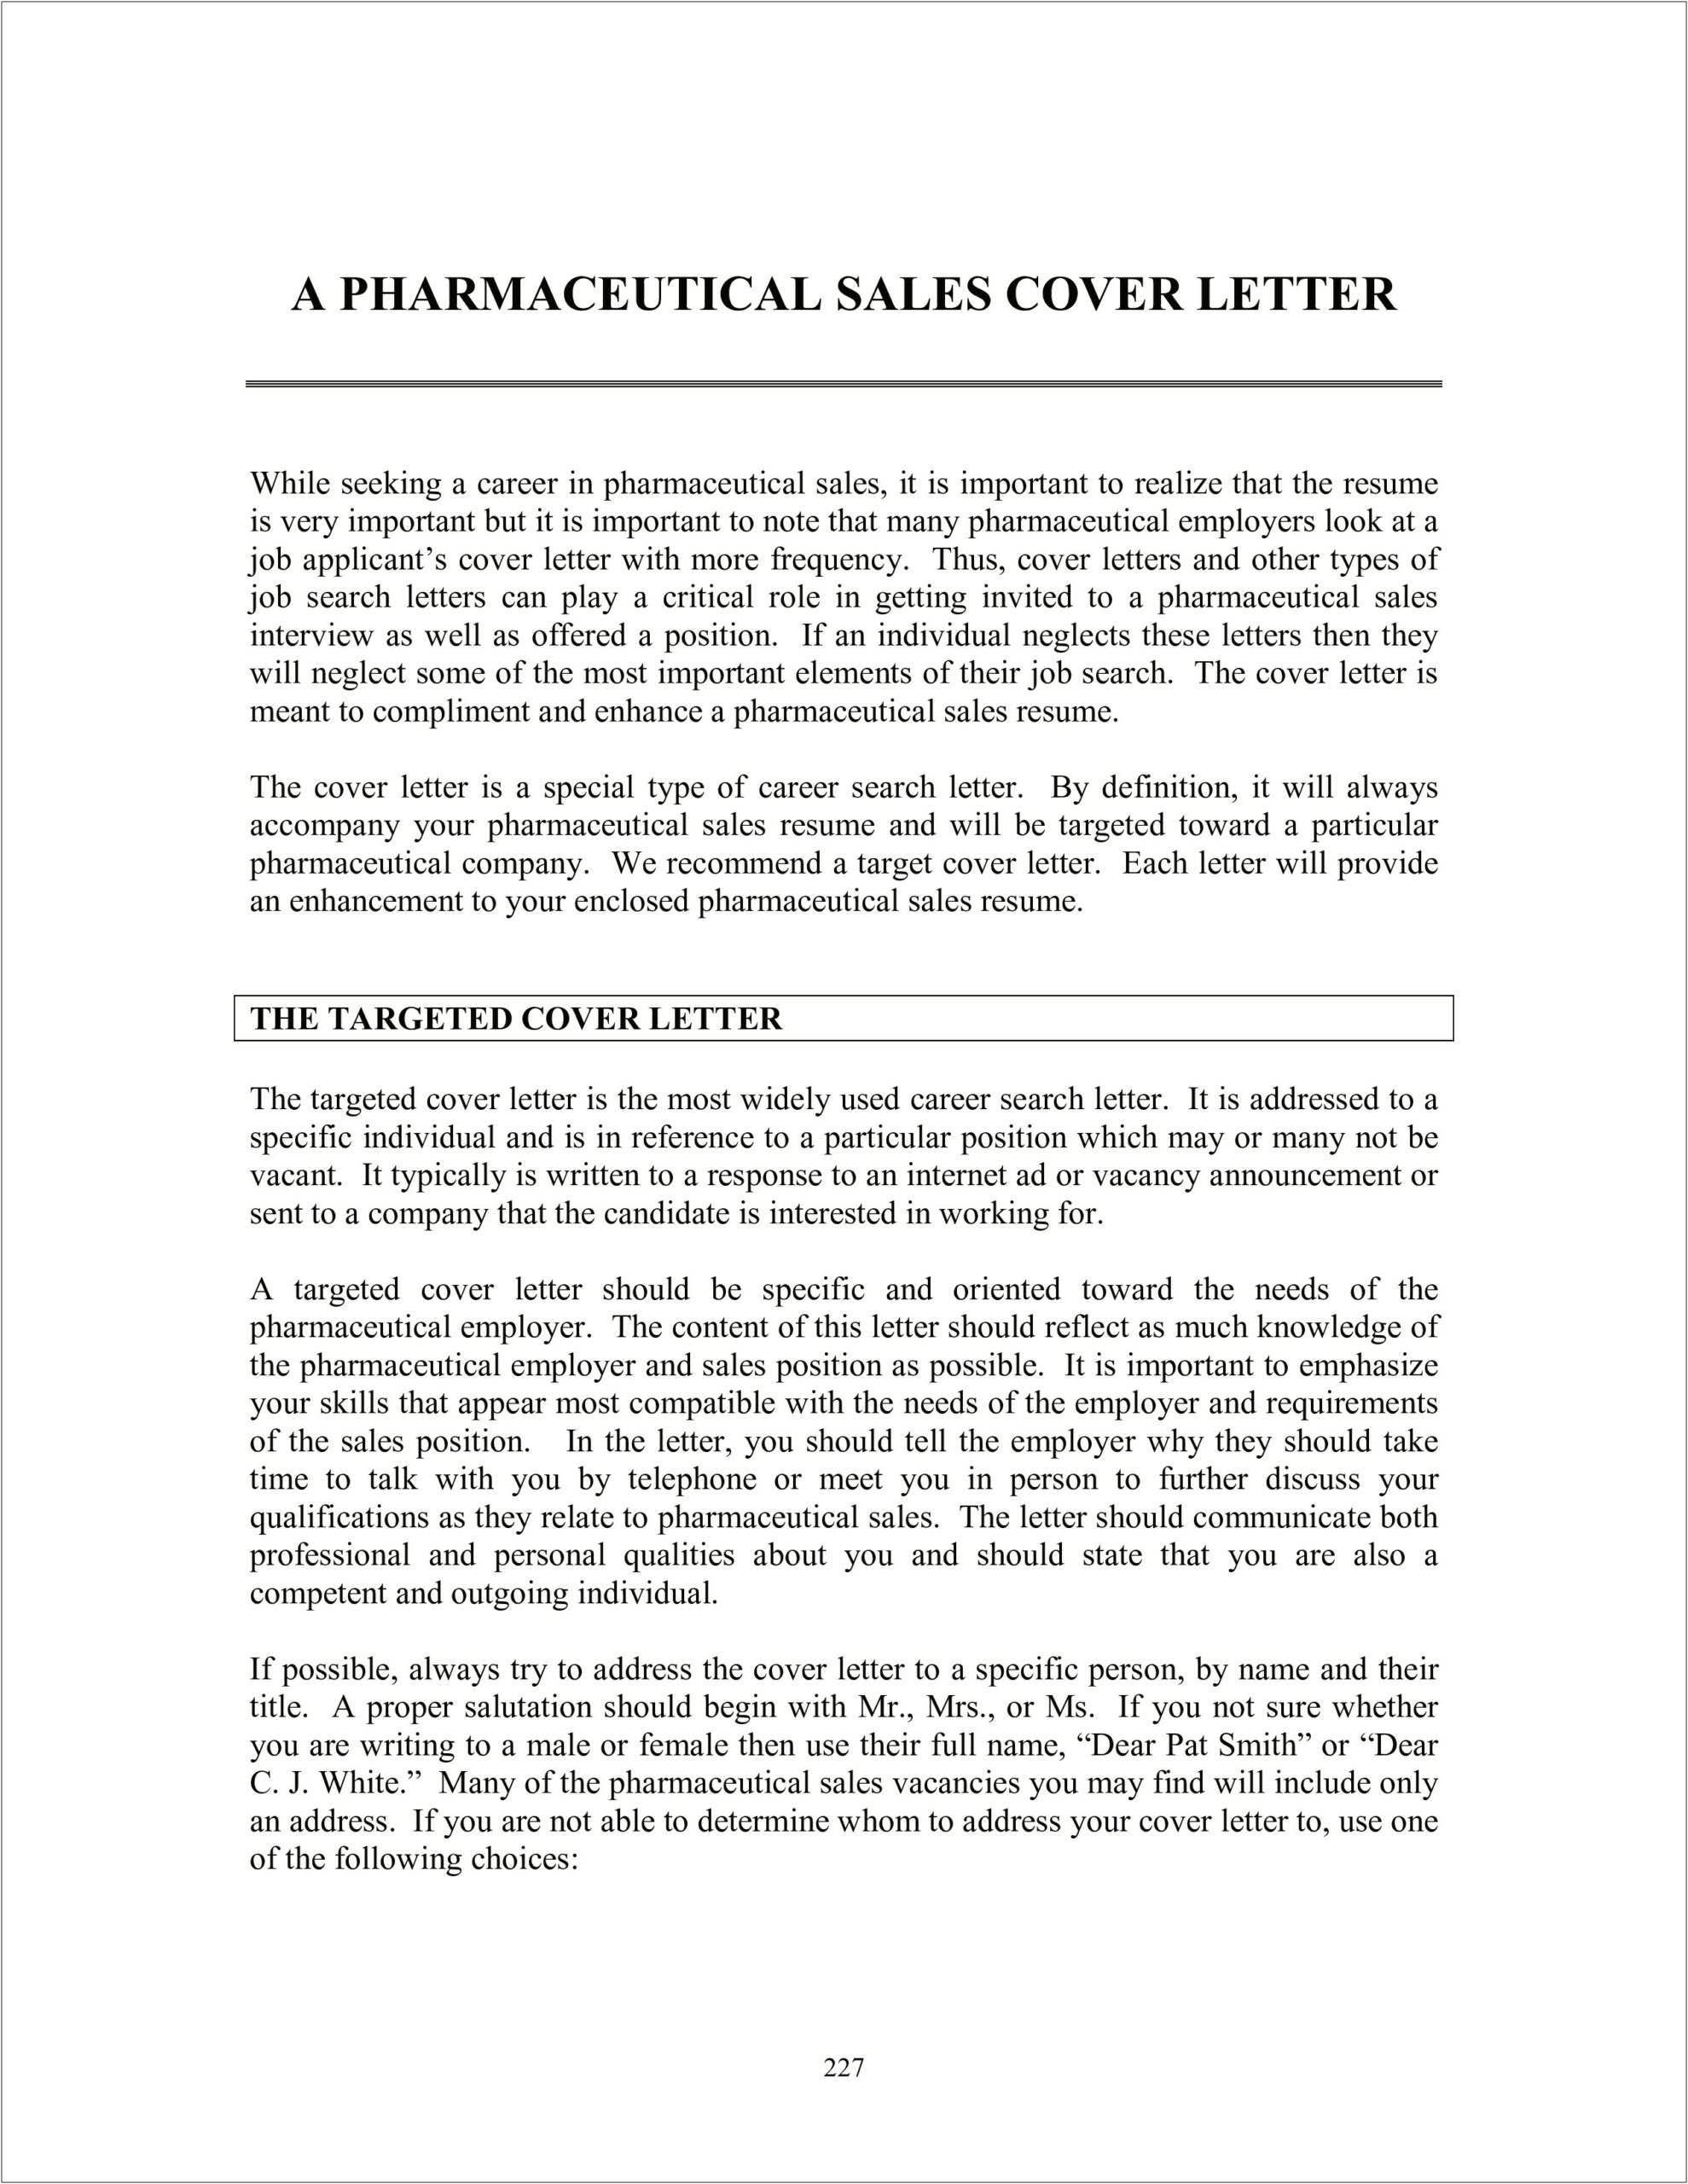 Should A Cover Letter Always Accompany A Resume